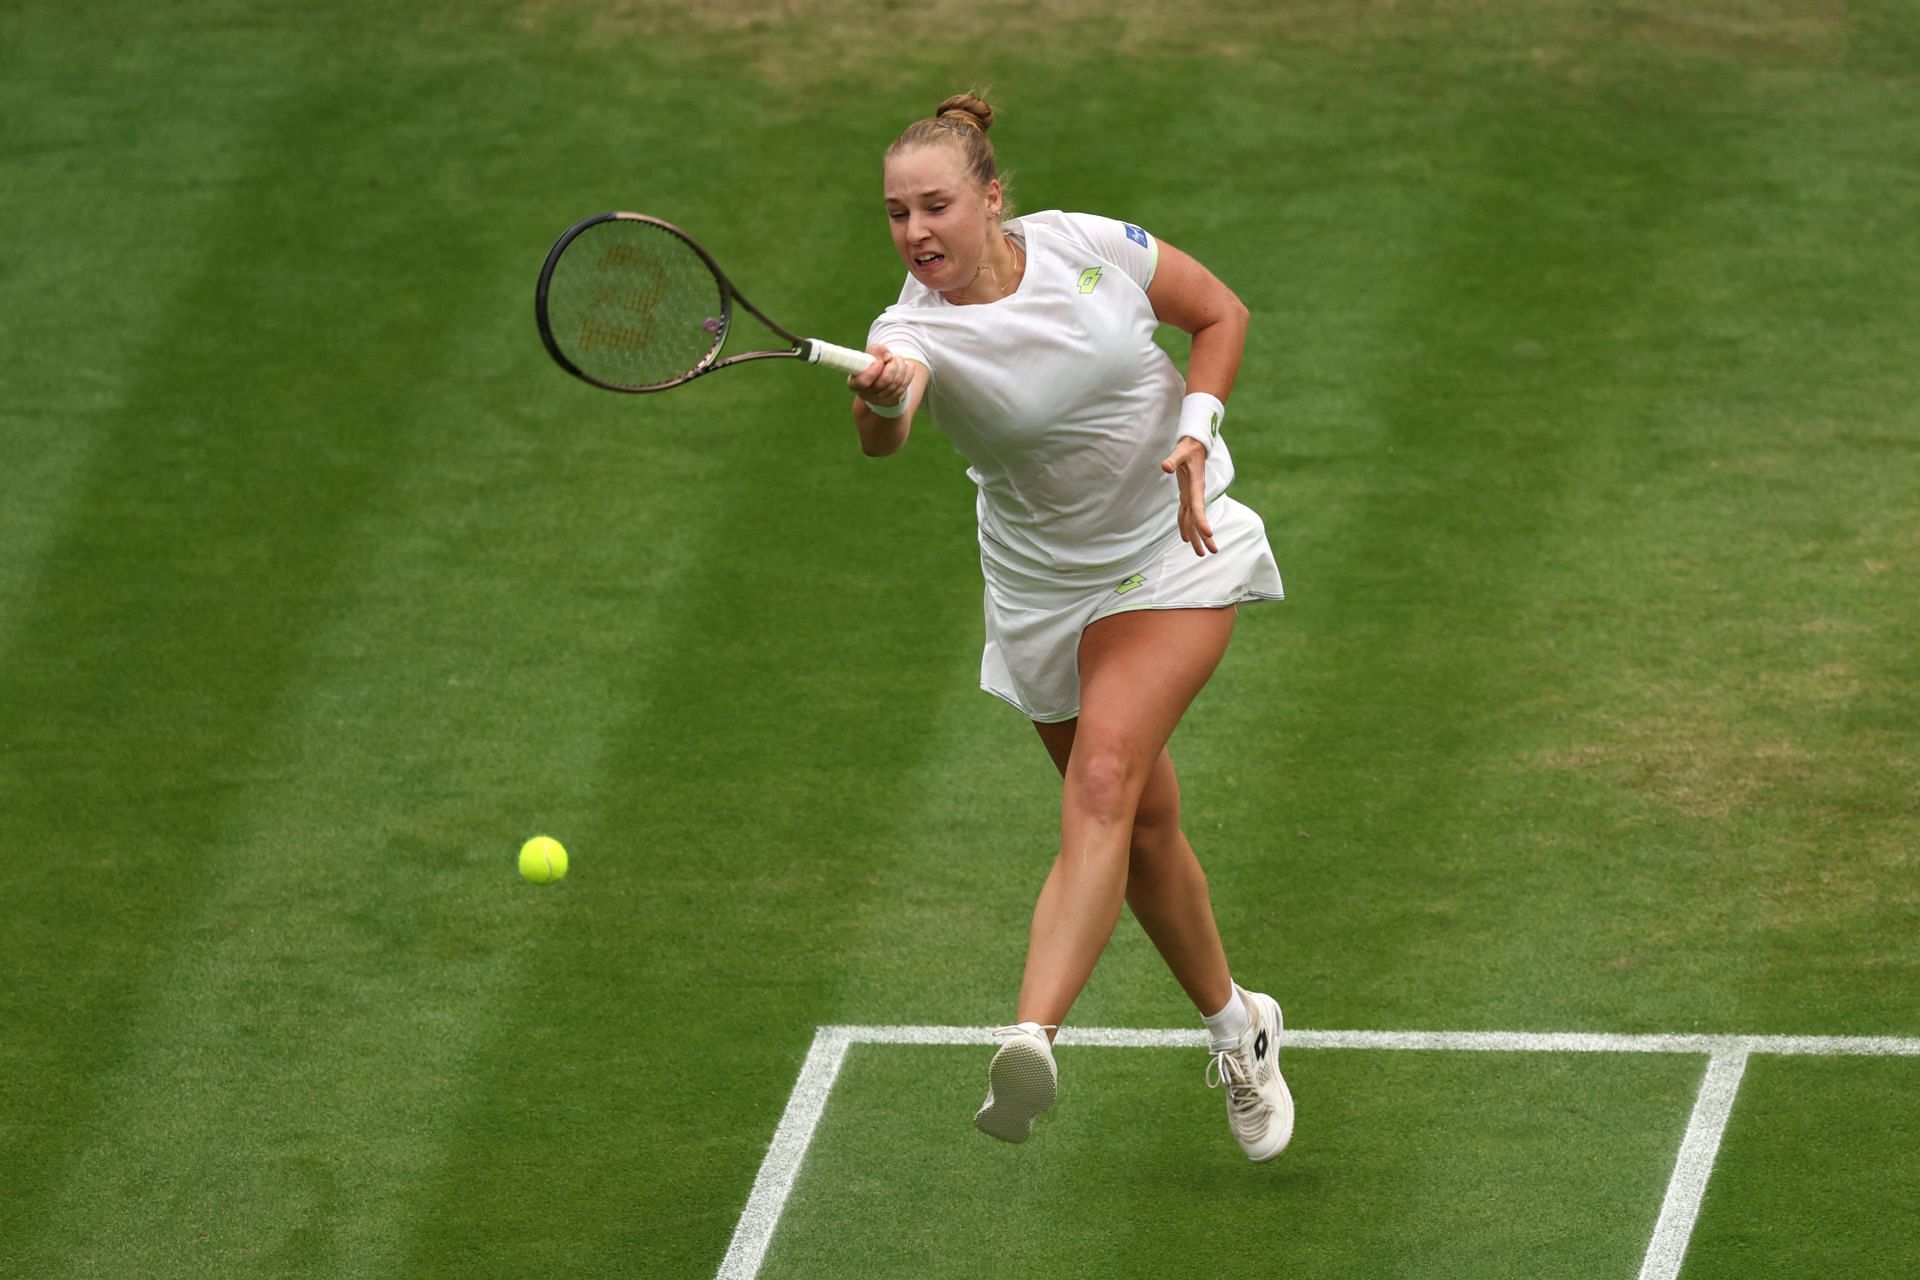 Blinkova is searching for her first win on grass this season (Credits: Getty)